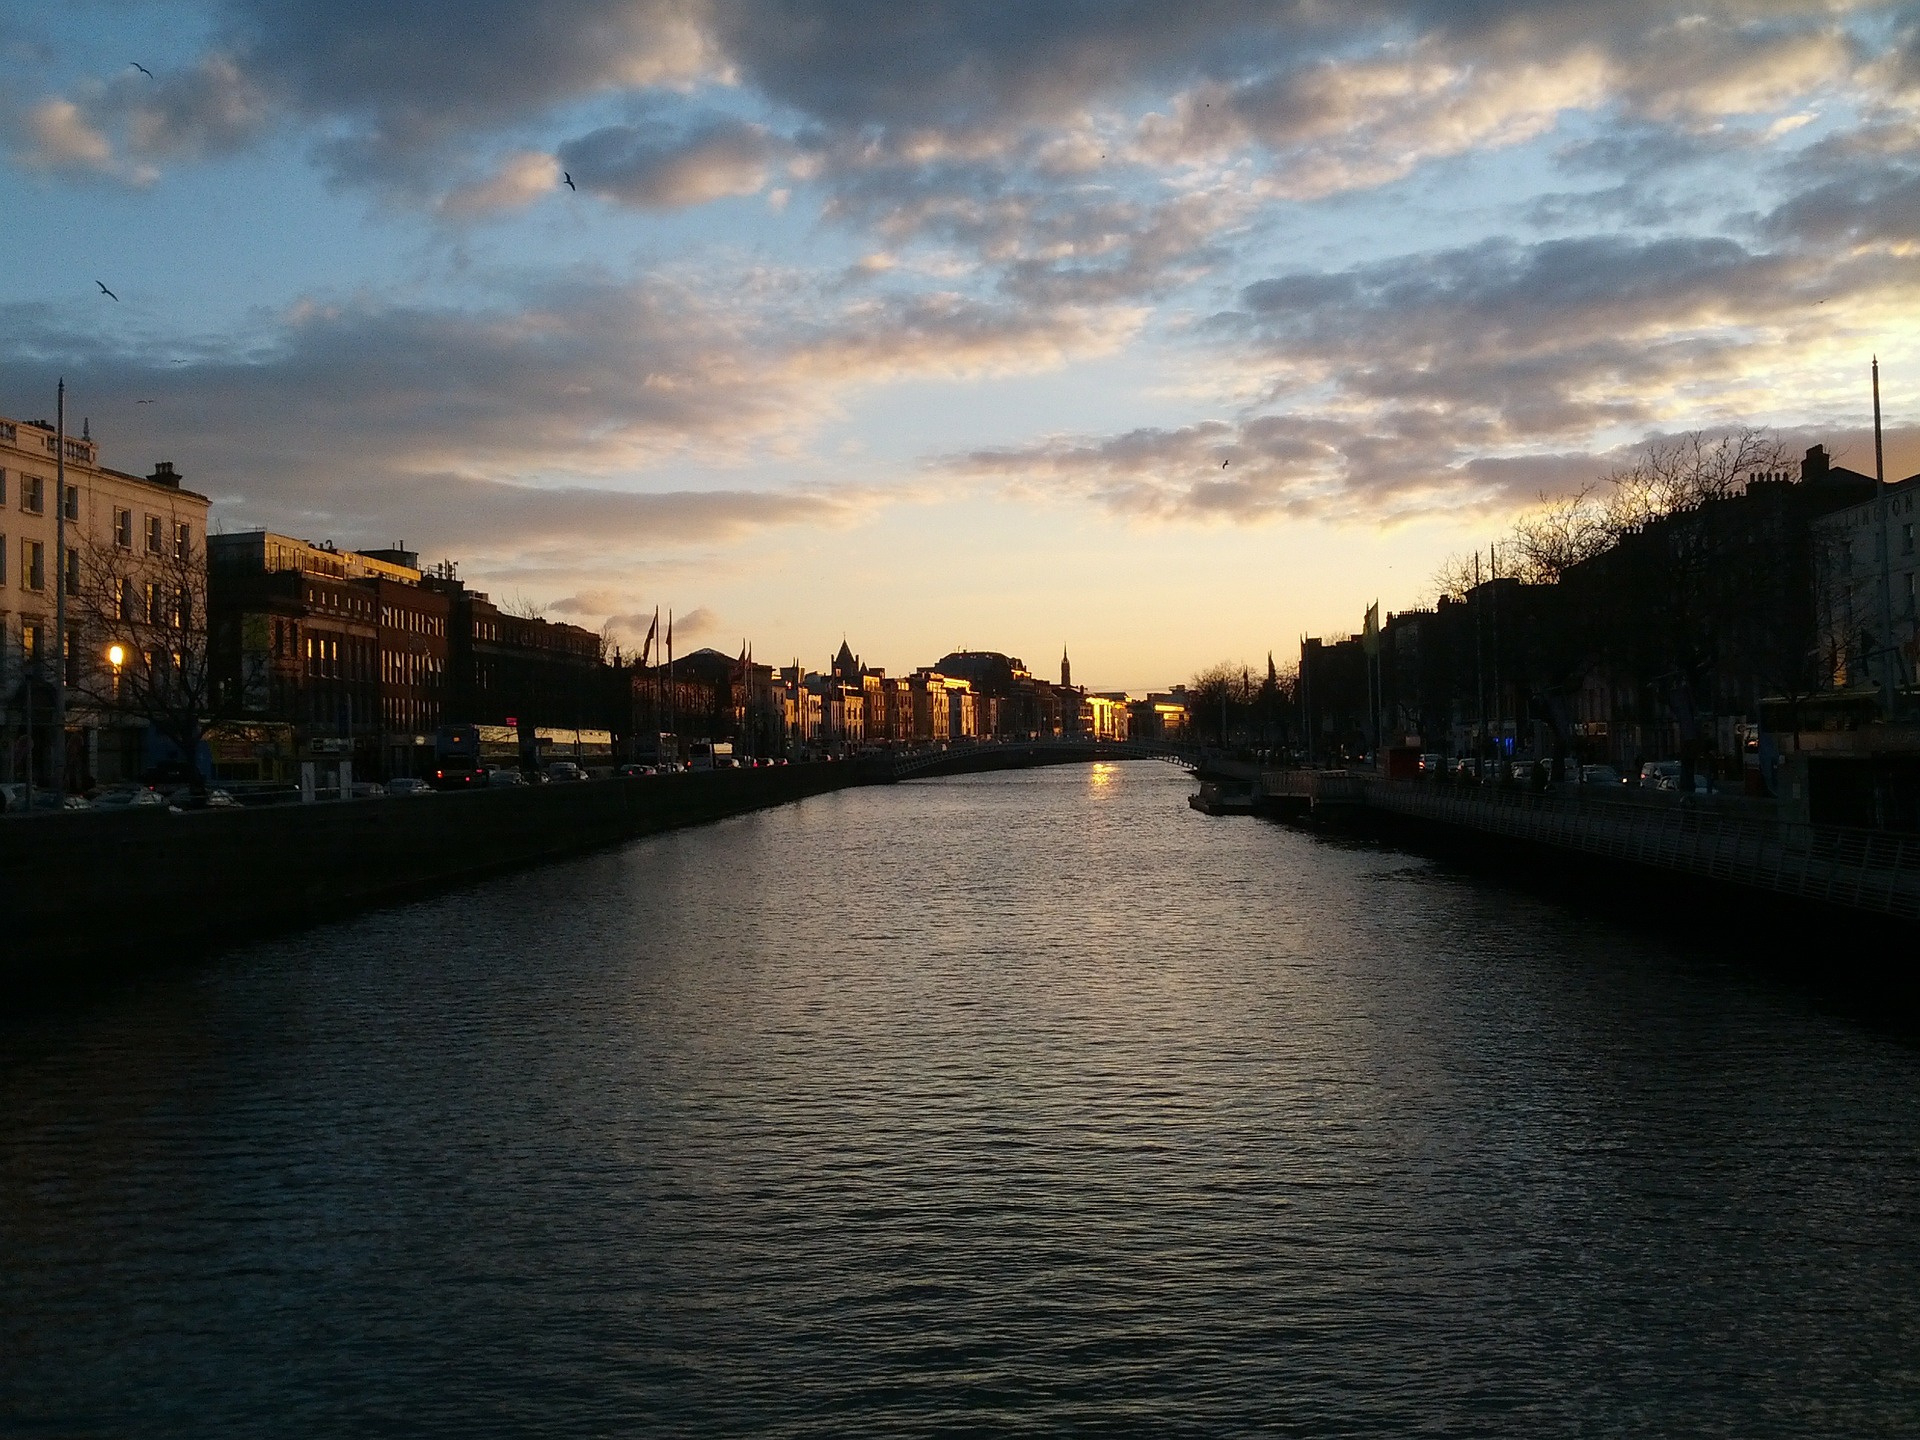 What to do in Dublin, Ireland